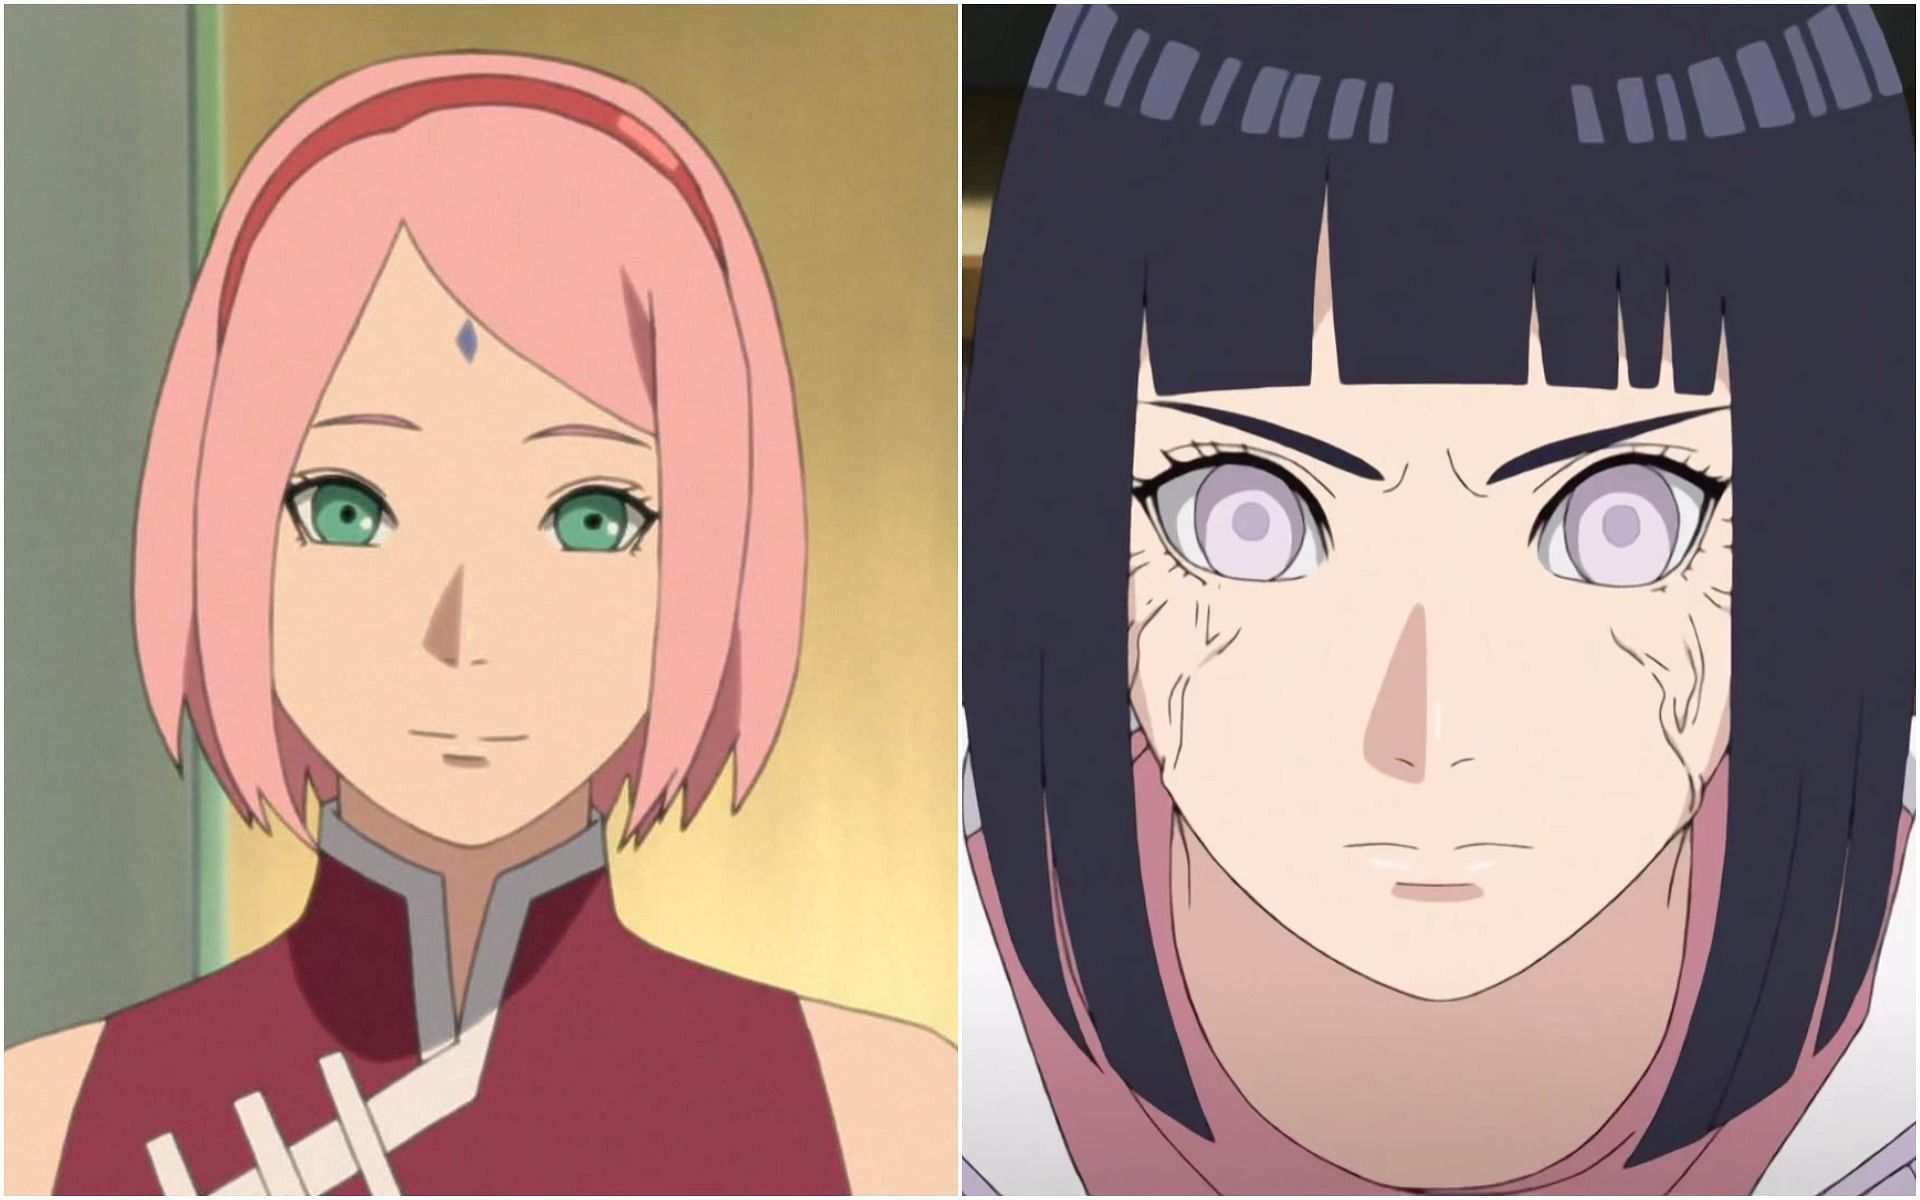 If Sakura didn't end up with Sasuke, who would be the best fit for